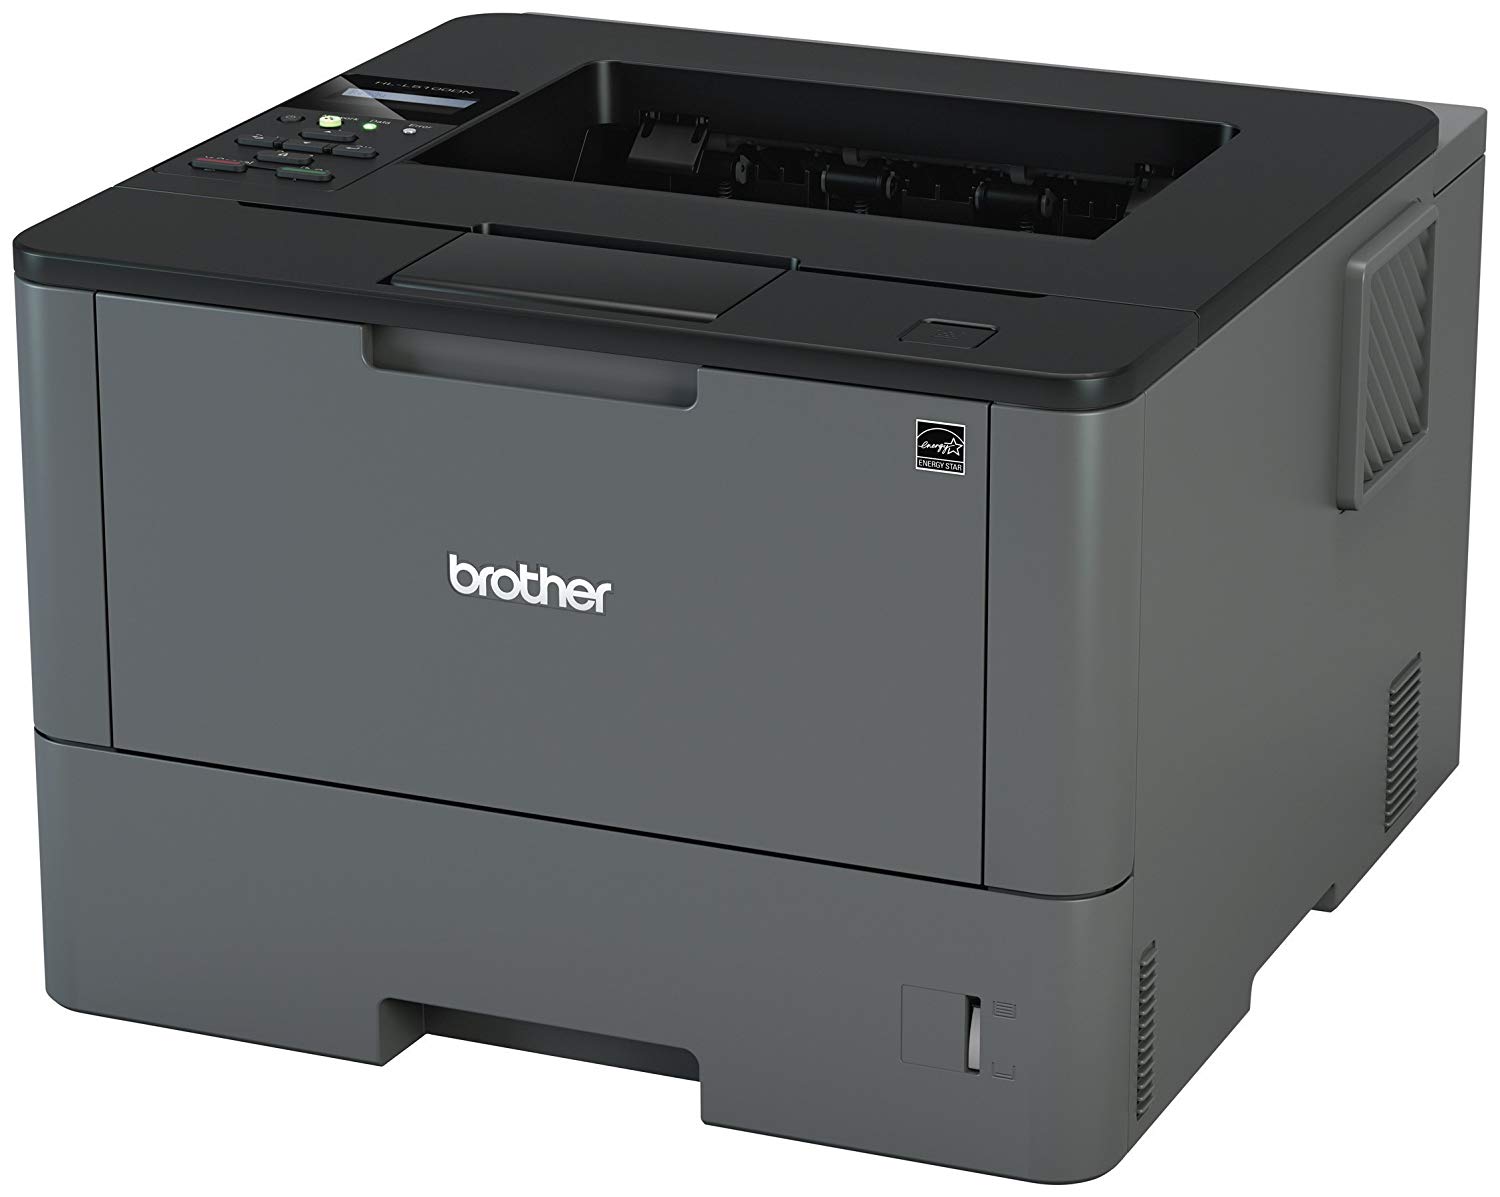 Brother Monocrome Laser Printer HL-L5100DN Print Only, 40 PPM, 512 MB Memory, Duplex, Wired Network